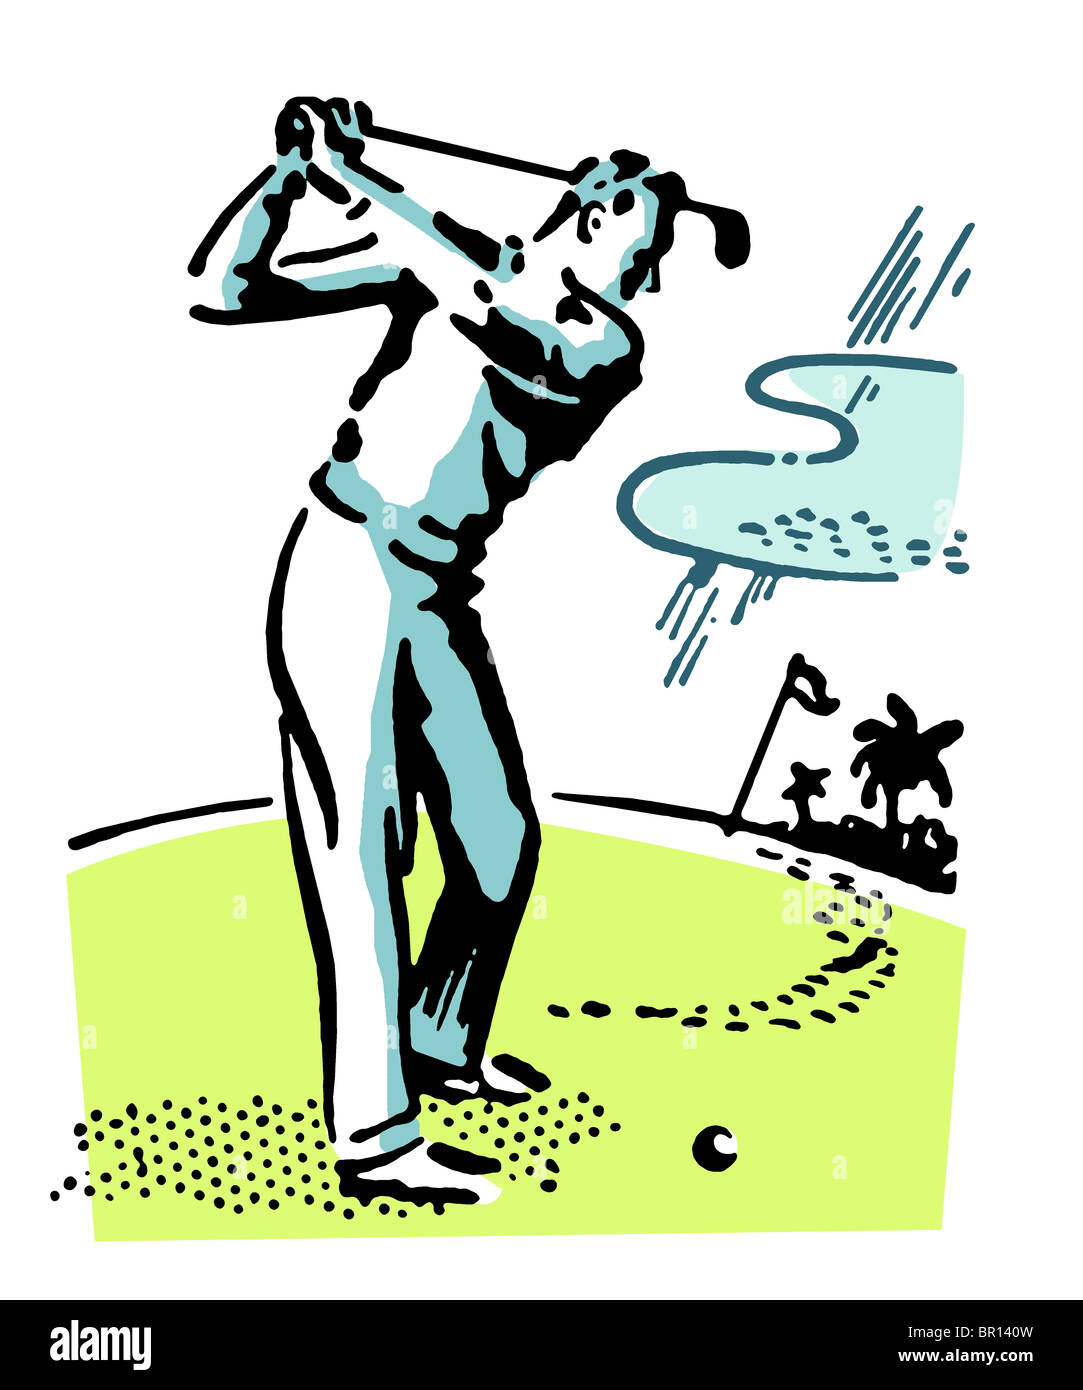 A vintage illustration of a man playing golf Stock Photo